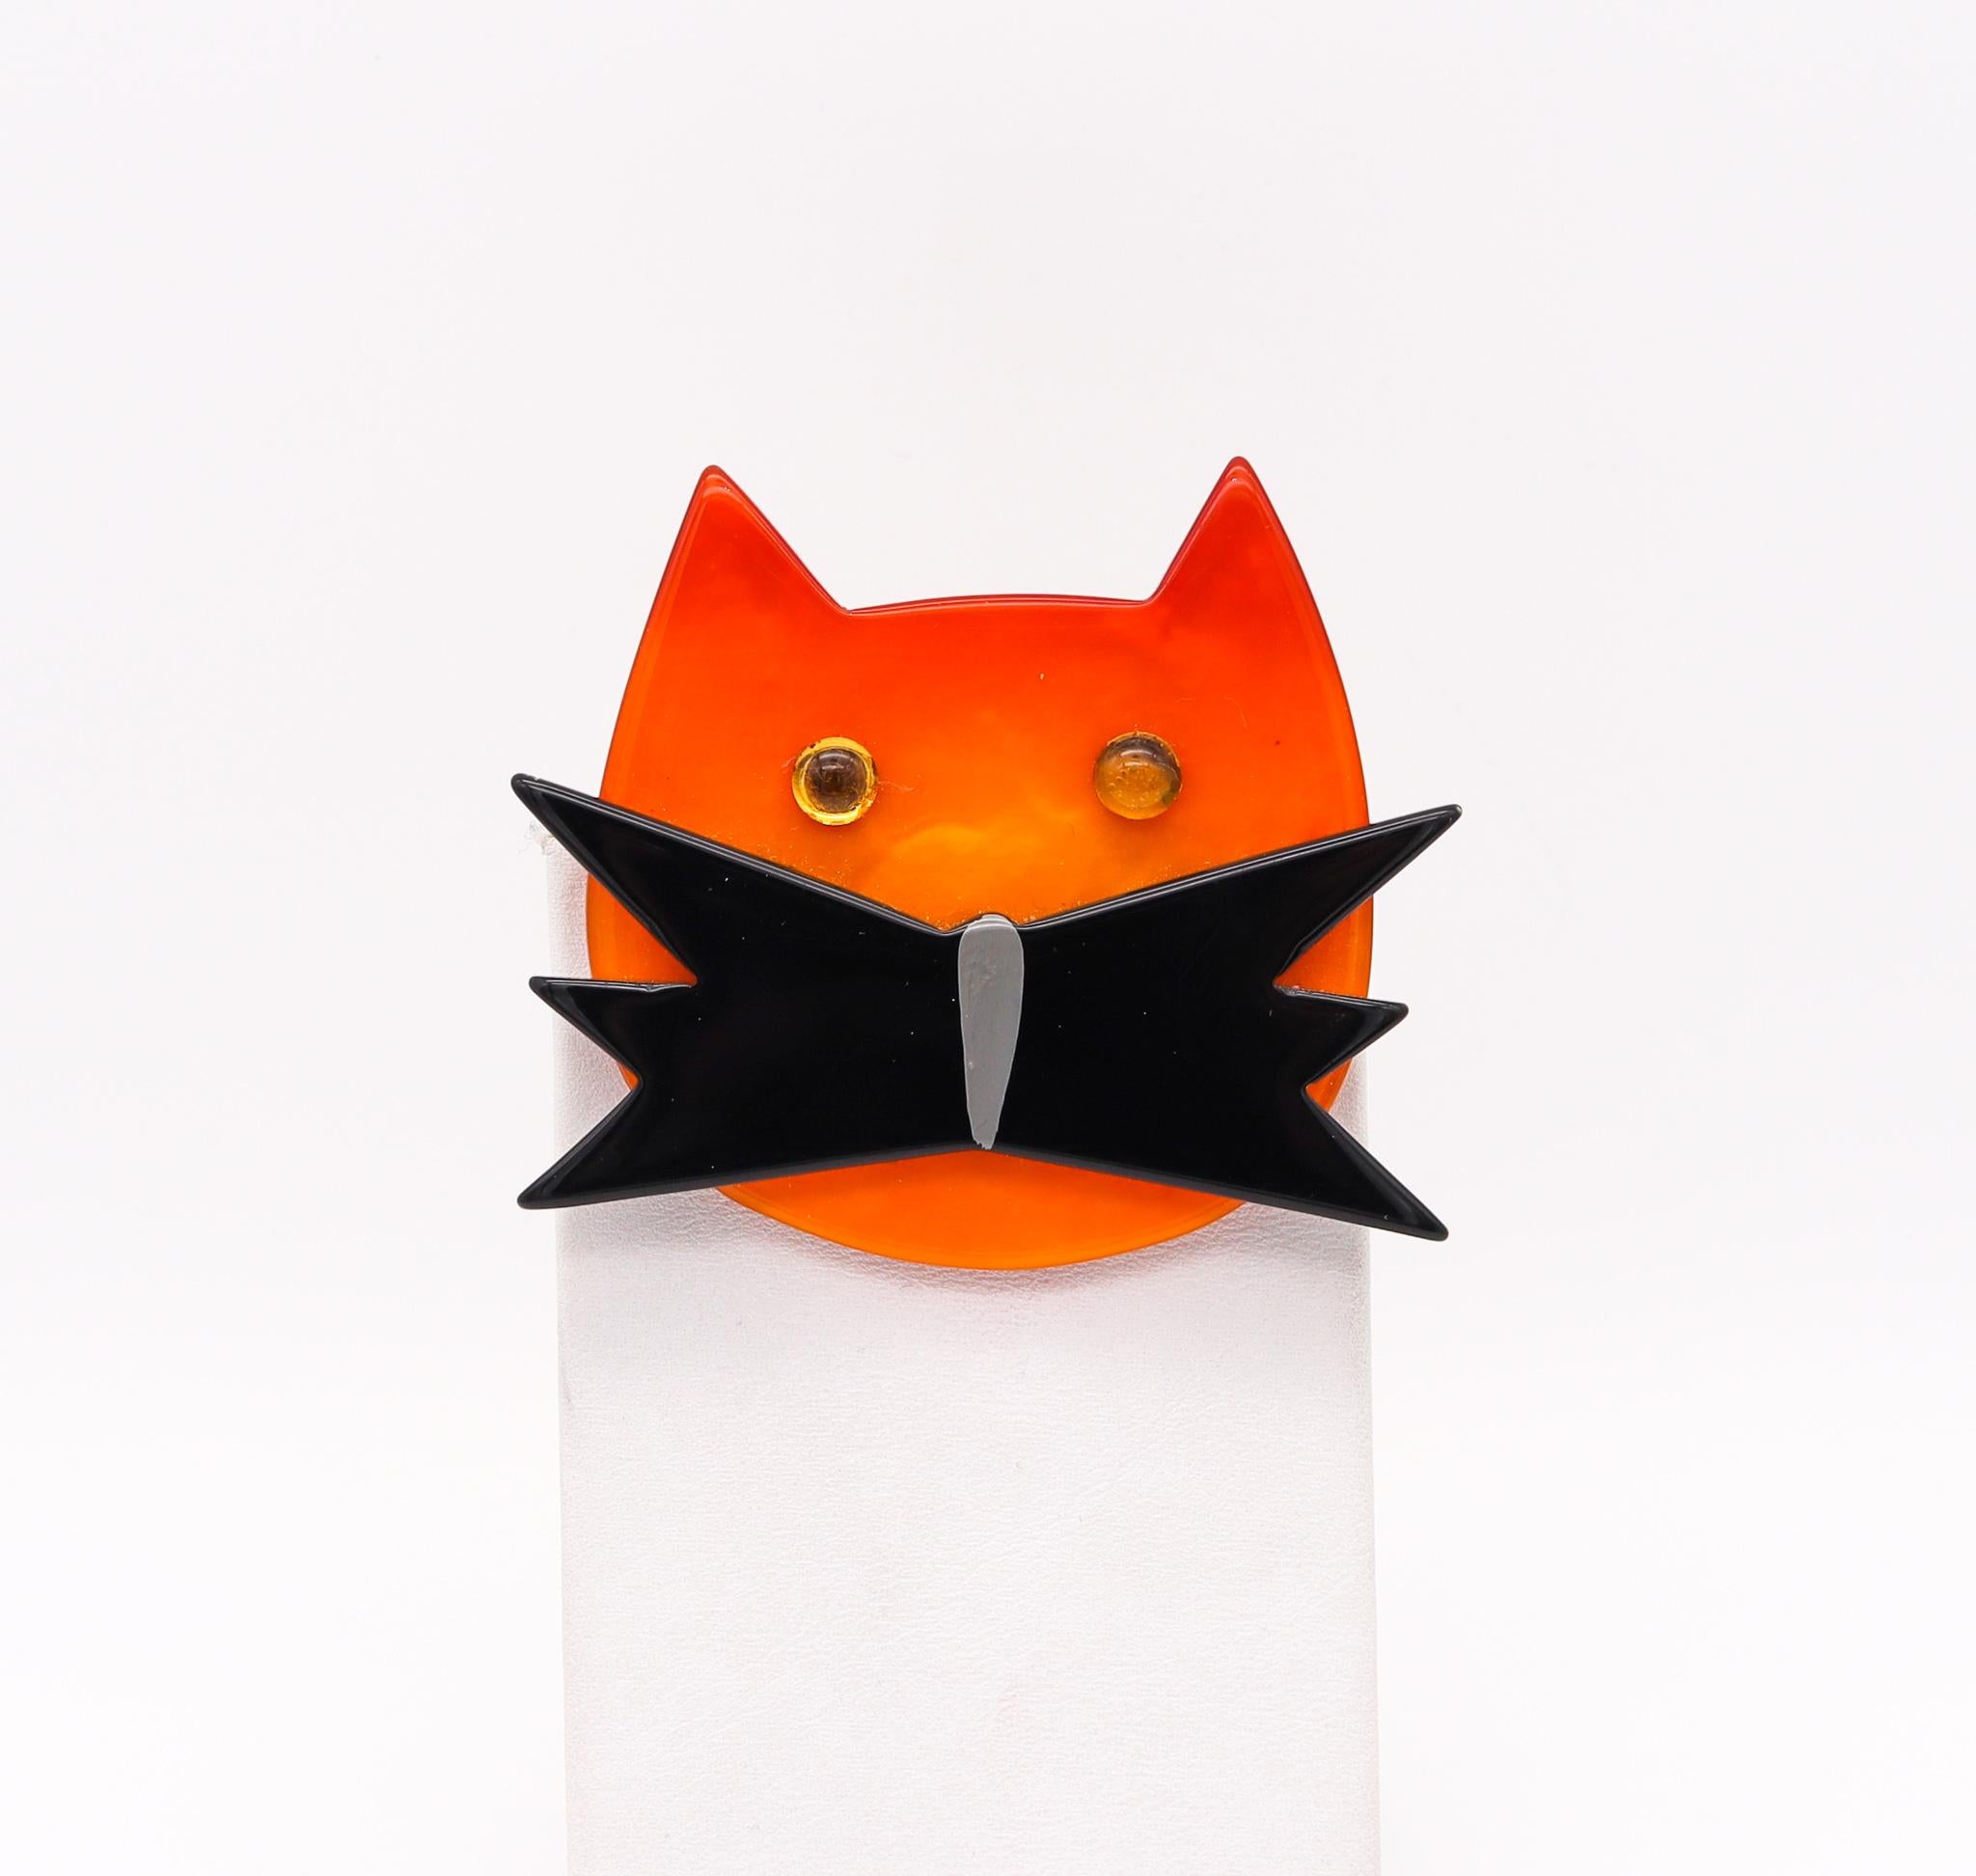 A cat brooch designed by Marie Christine Pavone.

Add some quirk to your brooch collection with our adorable cat brooch from Marie Christine Pavone. Cat constructed from contrasting black and orange bakelite and accented with two orange rhinestone